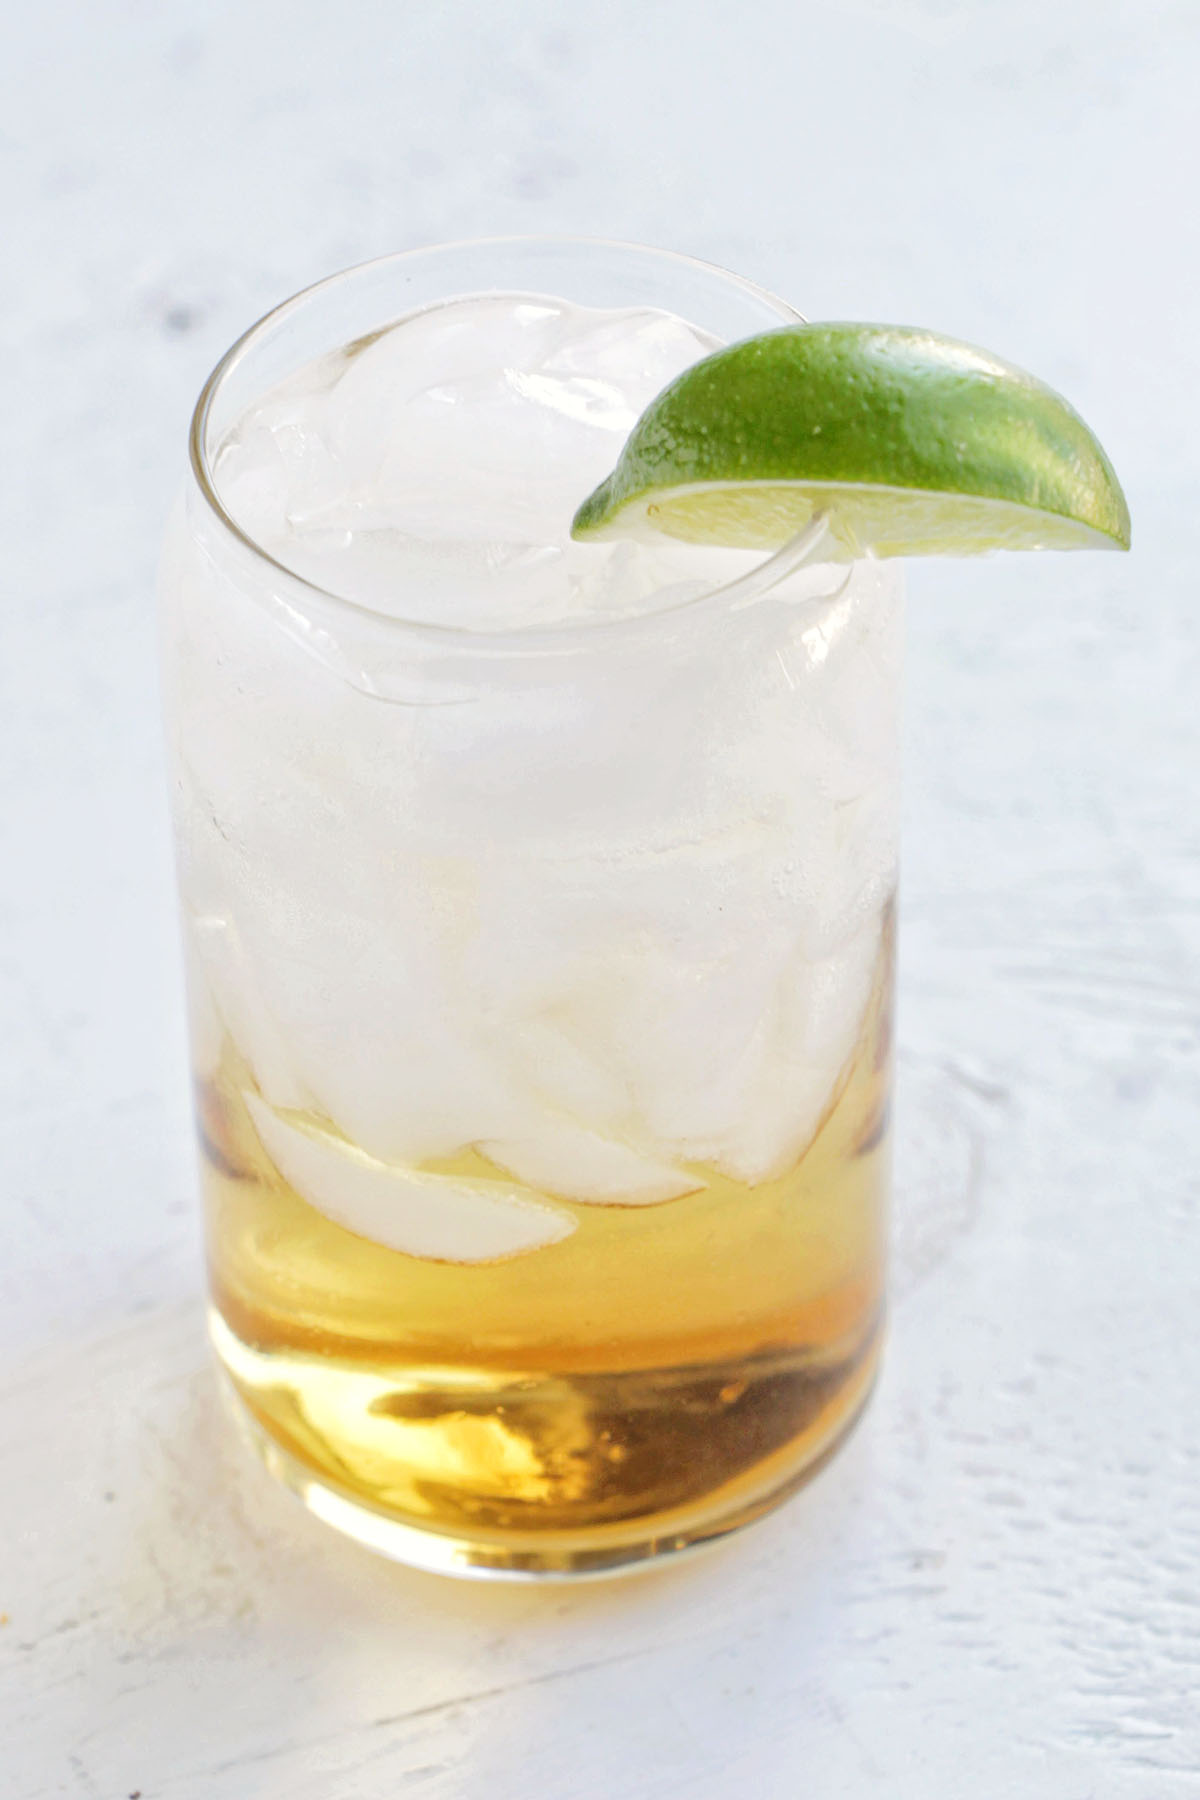 spiced rum and ginger beer with lime garnish.